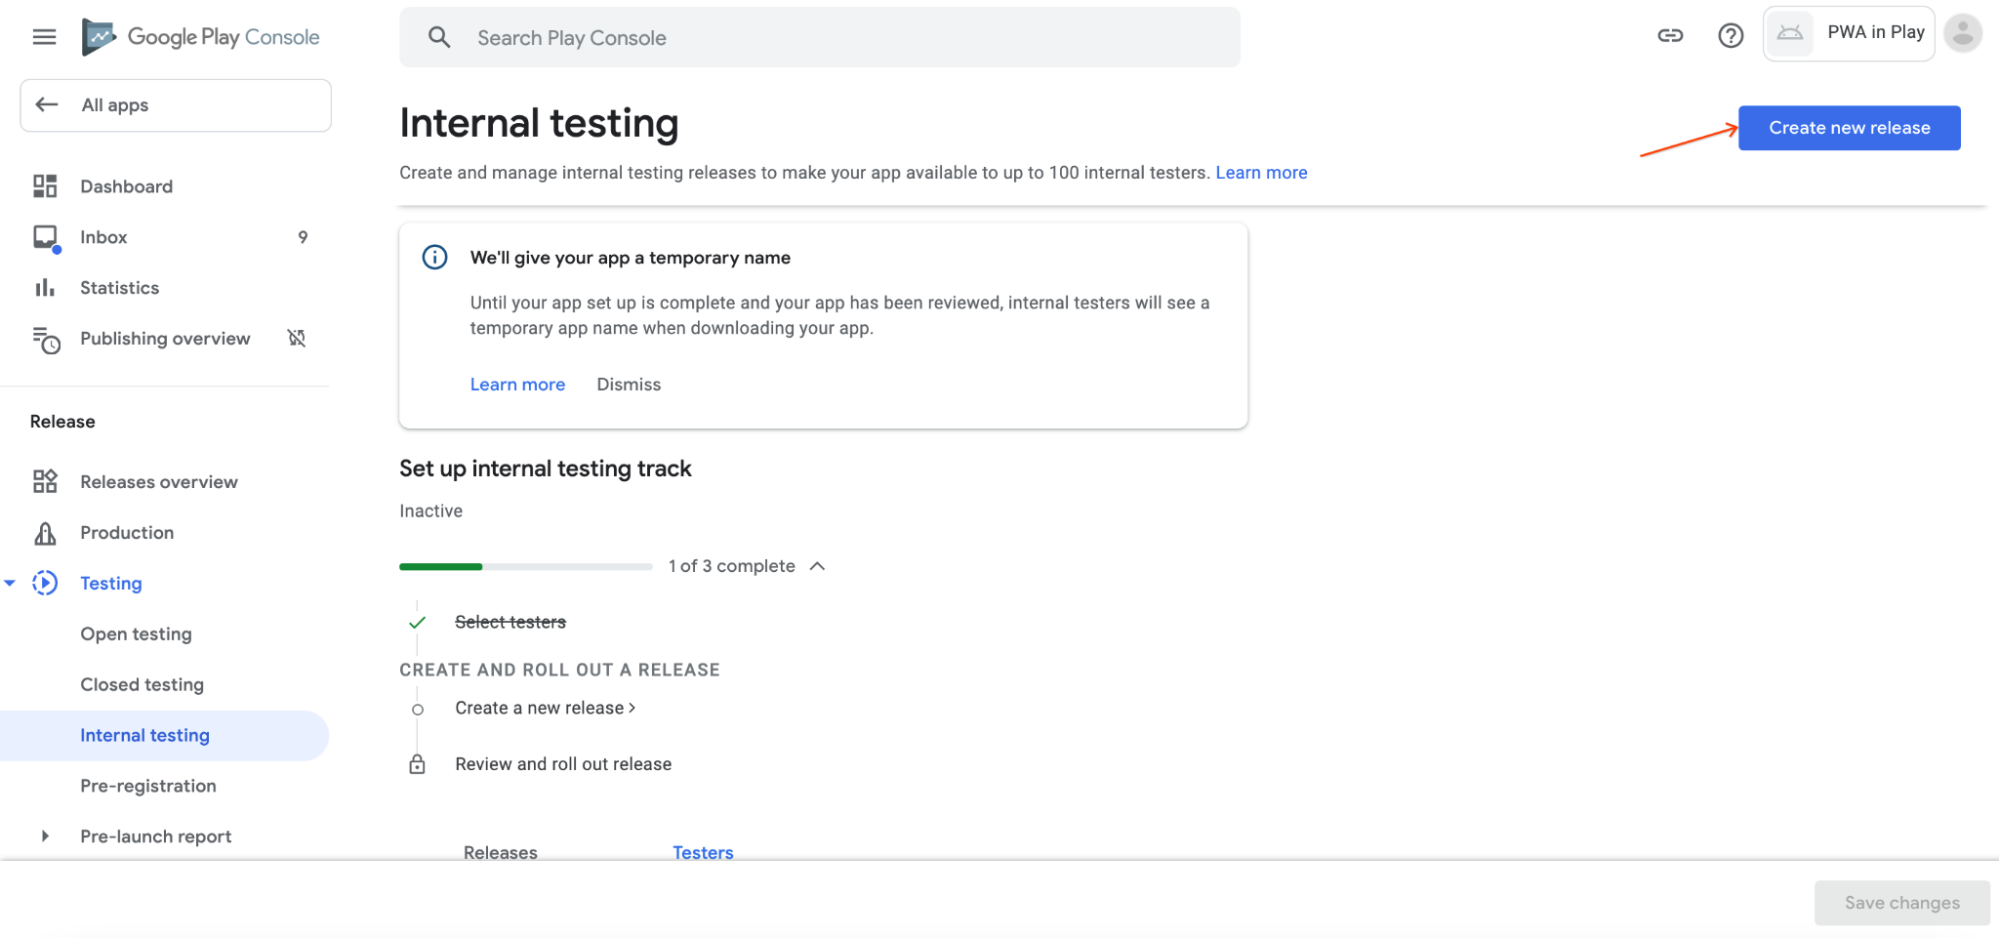 Internal testing page with an arrow pointing to the create new release button.